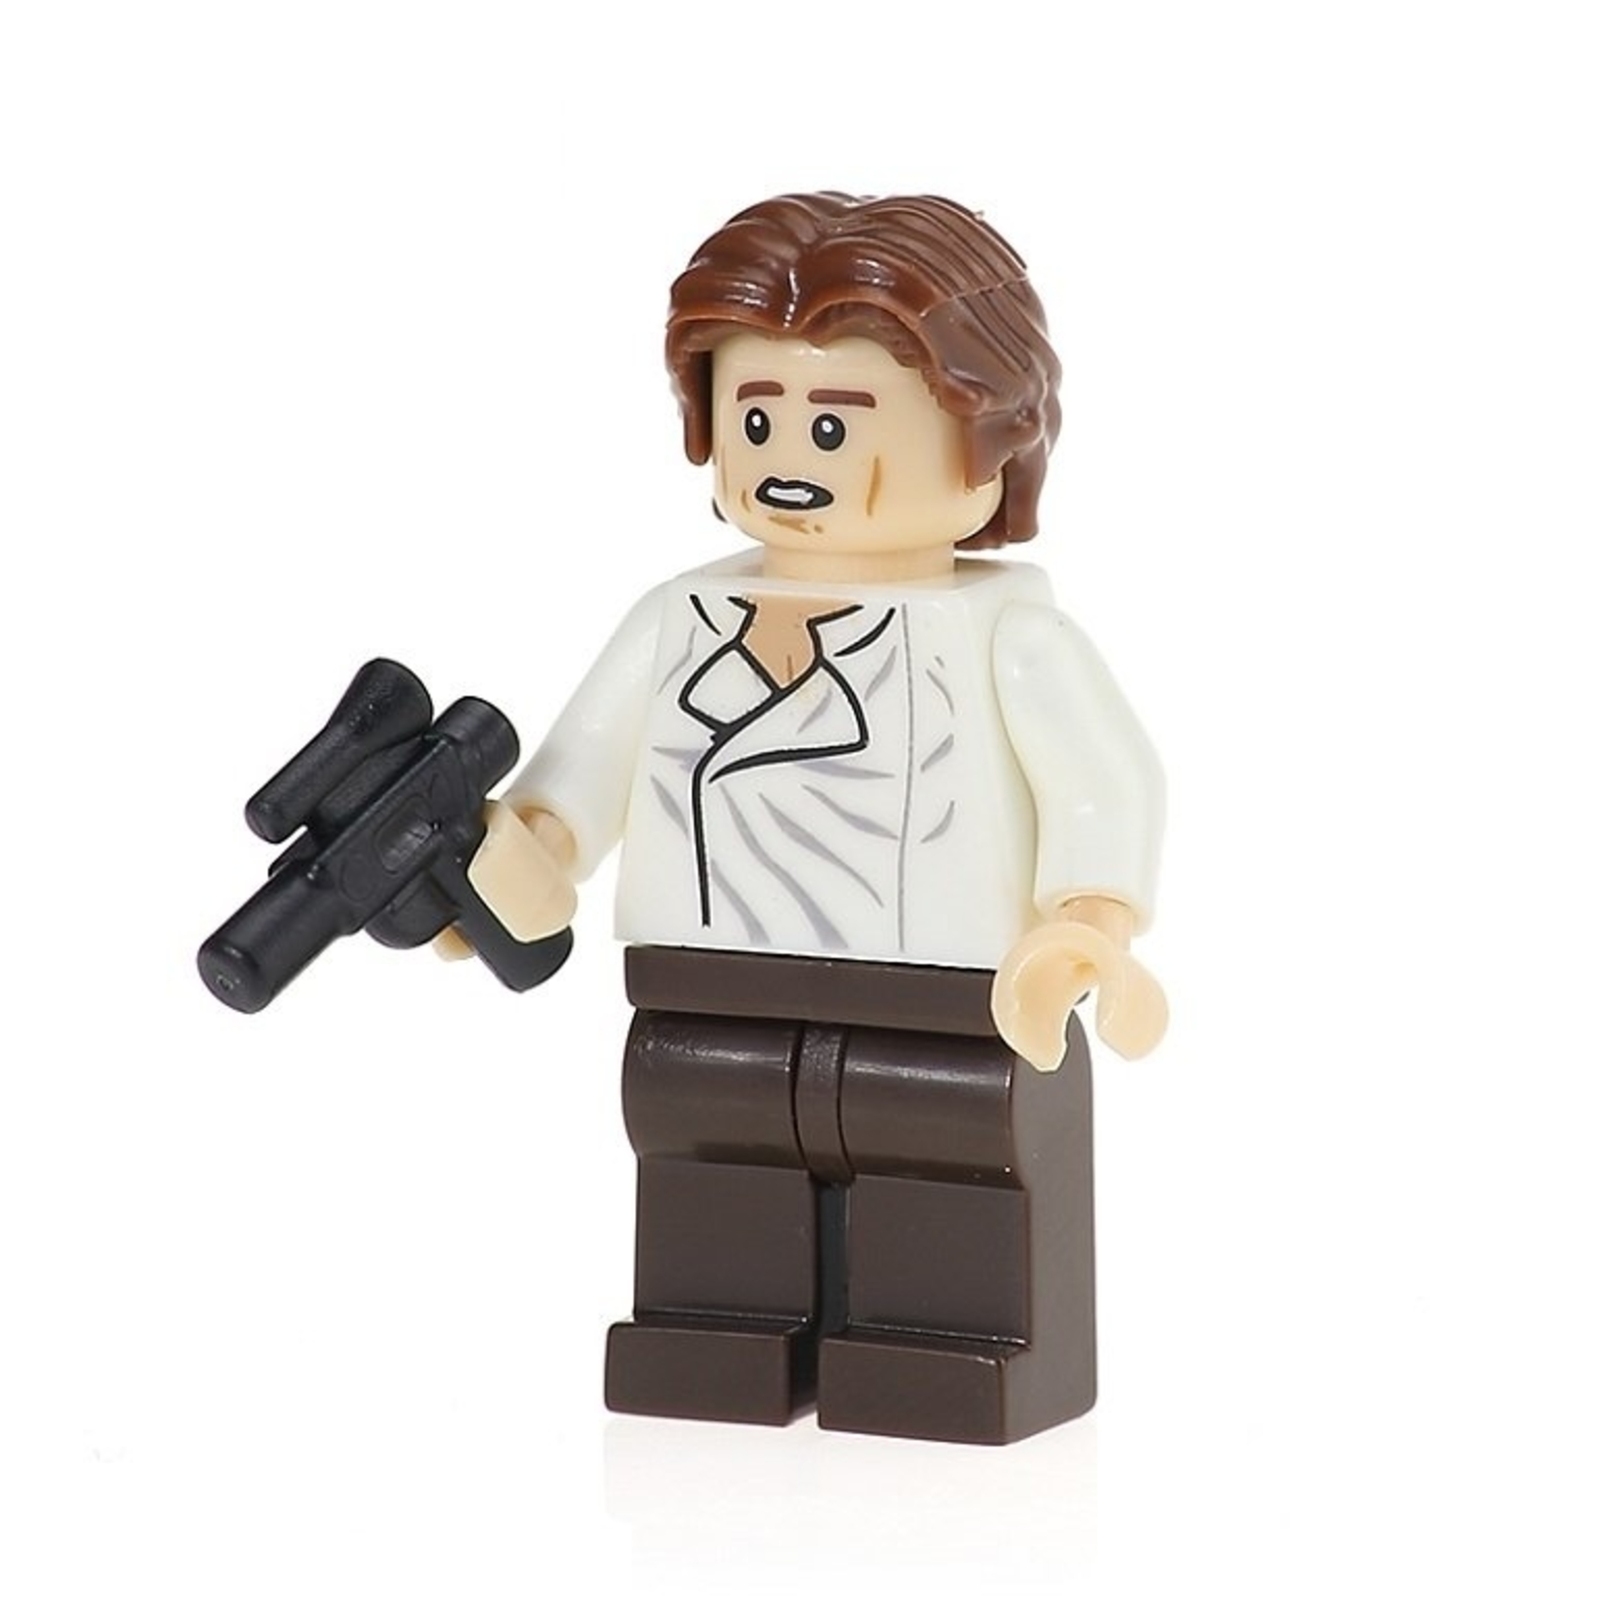 Han Solo Custom Minifigure Bespin Carbonite Star Wars Toy Gift